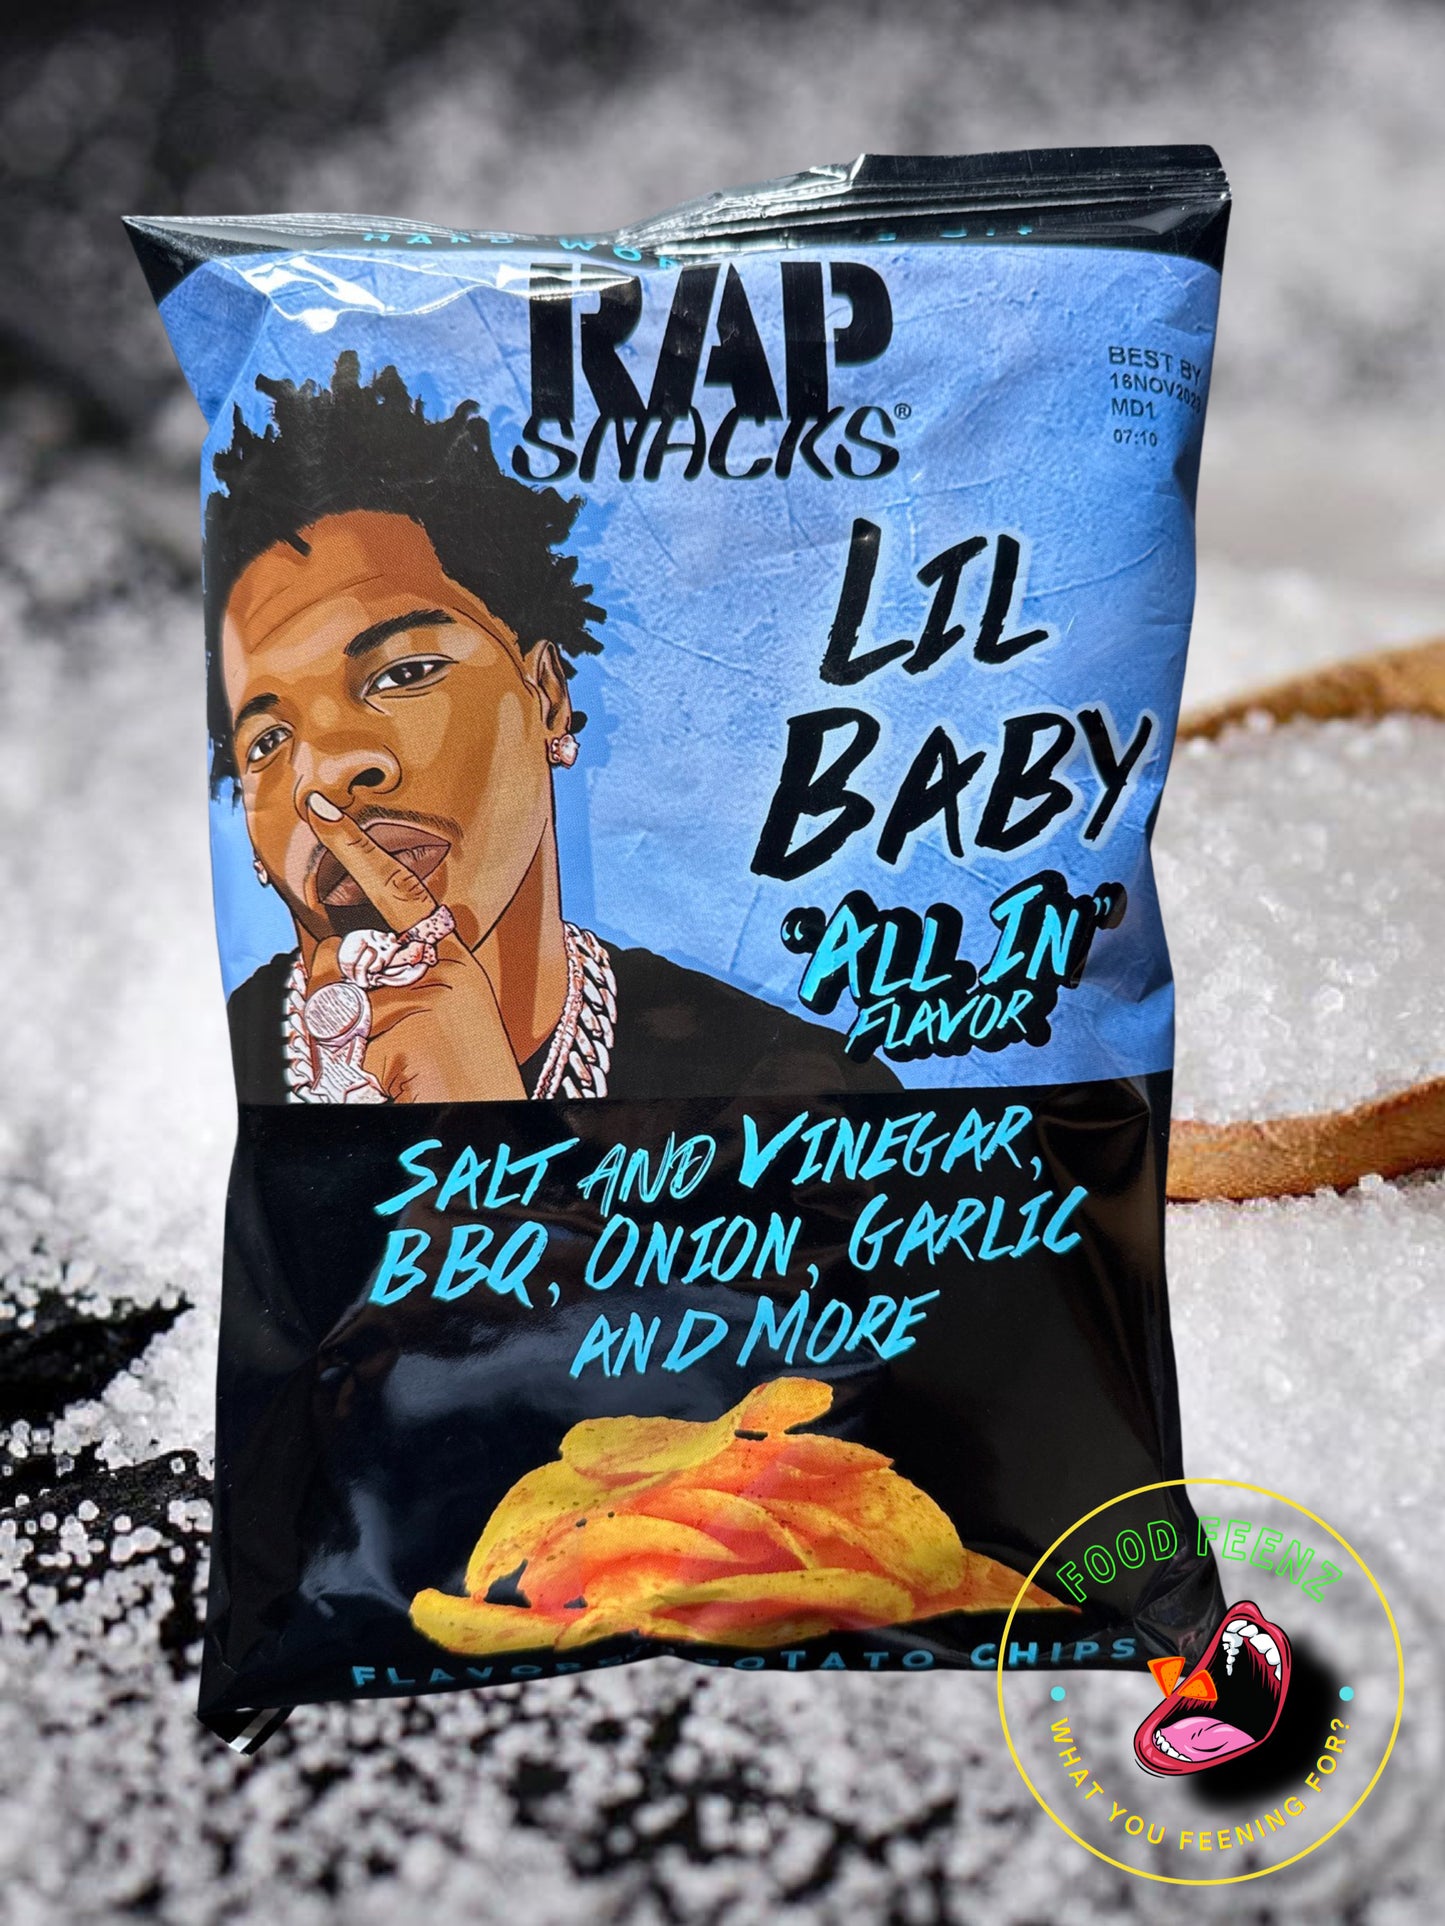 RAP SNACKS Lil Baby "All In" Flavor